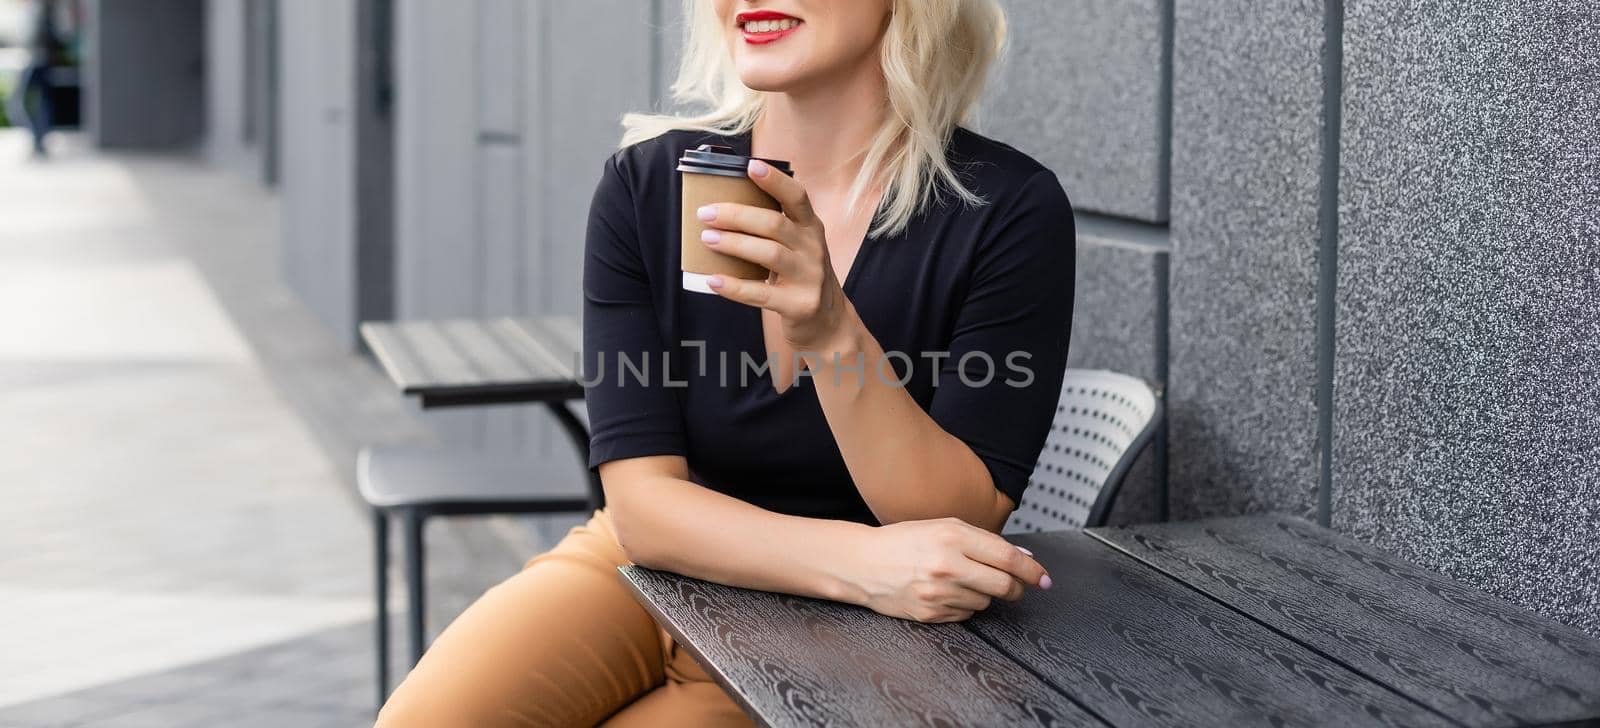 woman in a cafe drinking coffee by Andelov13